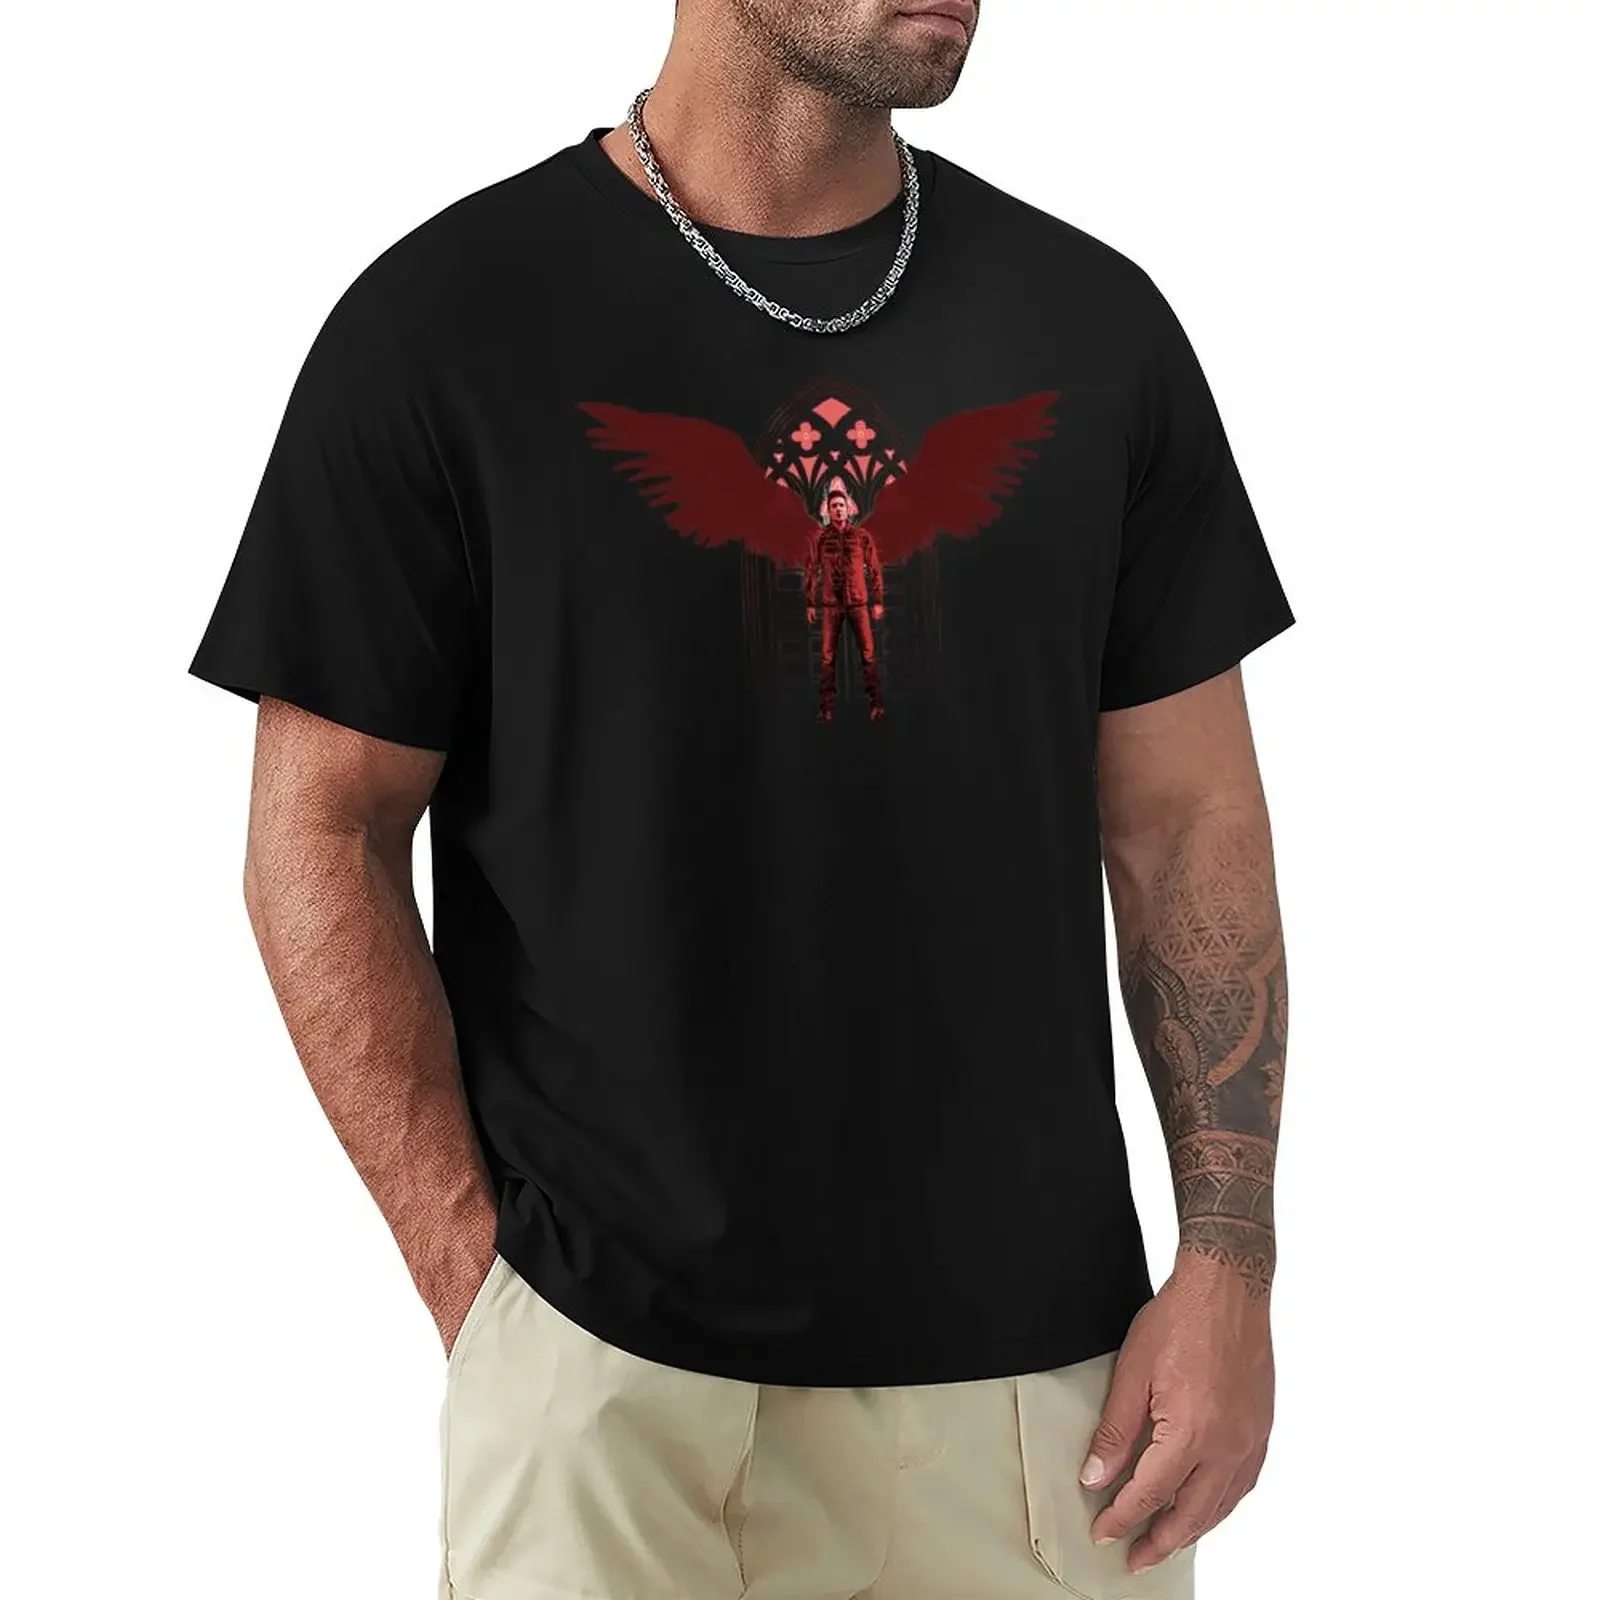 

Dean Gets His Wings T-Shirt animal prinfor boys for a boy tees oversized t shirts for men